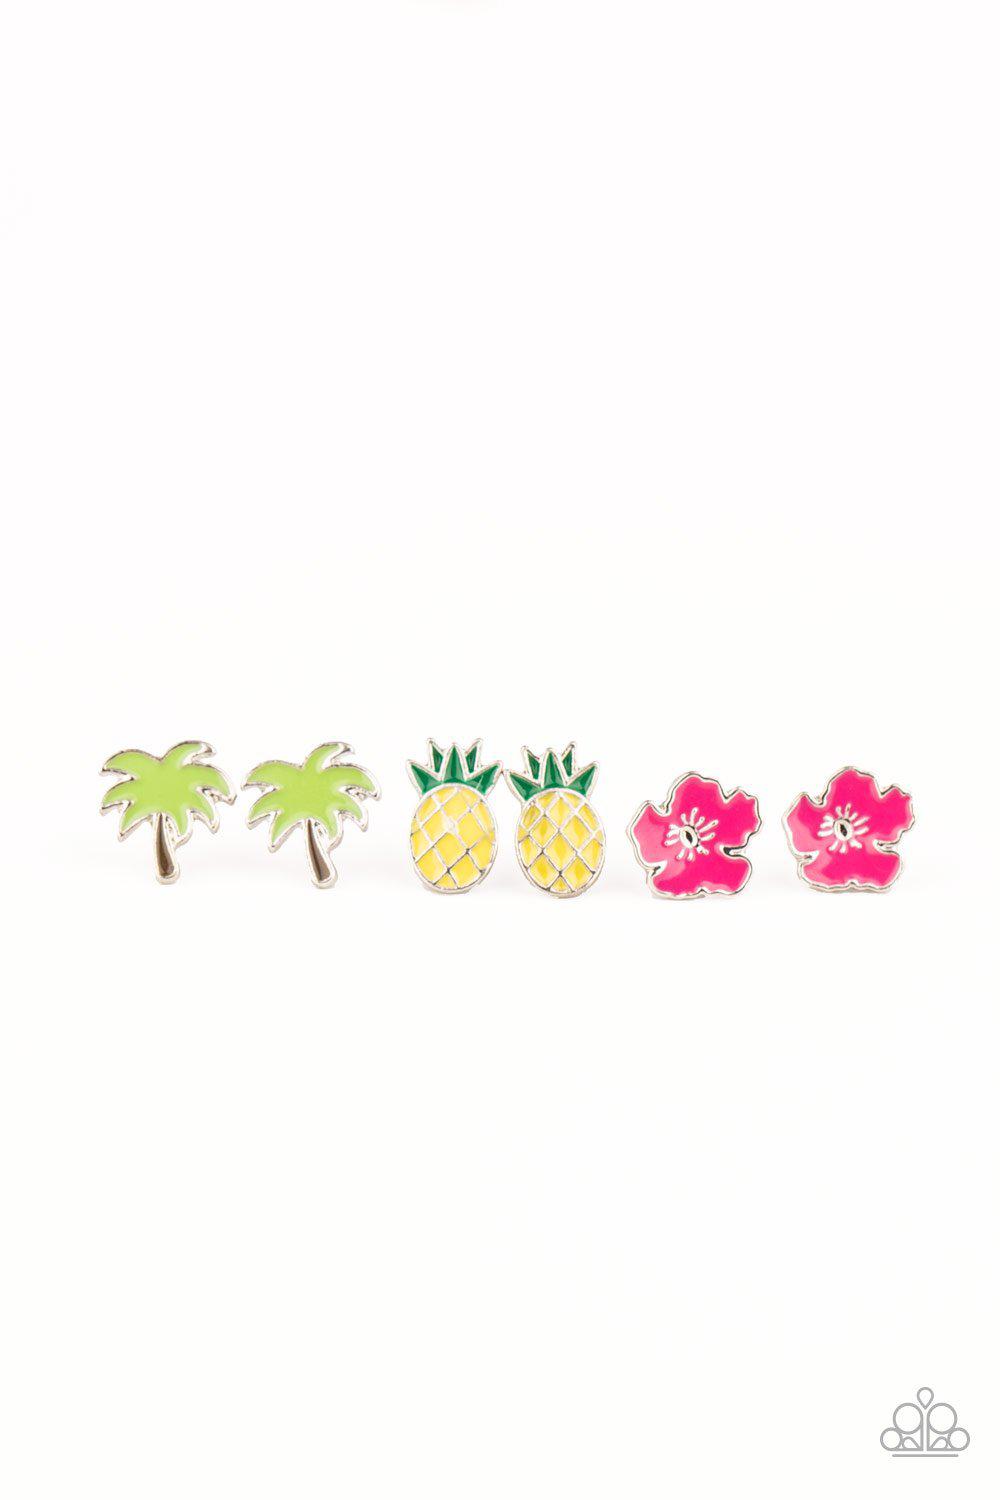 Starlet Shimmer Children&#39;s Tropical Theme Post Earrings - Paparazzi Accessories (set of 5)-CarasShop.com - $5 Jewelry by Cara Jewels